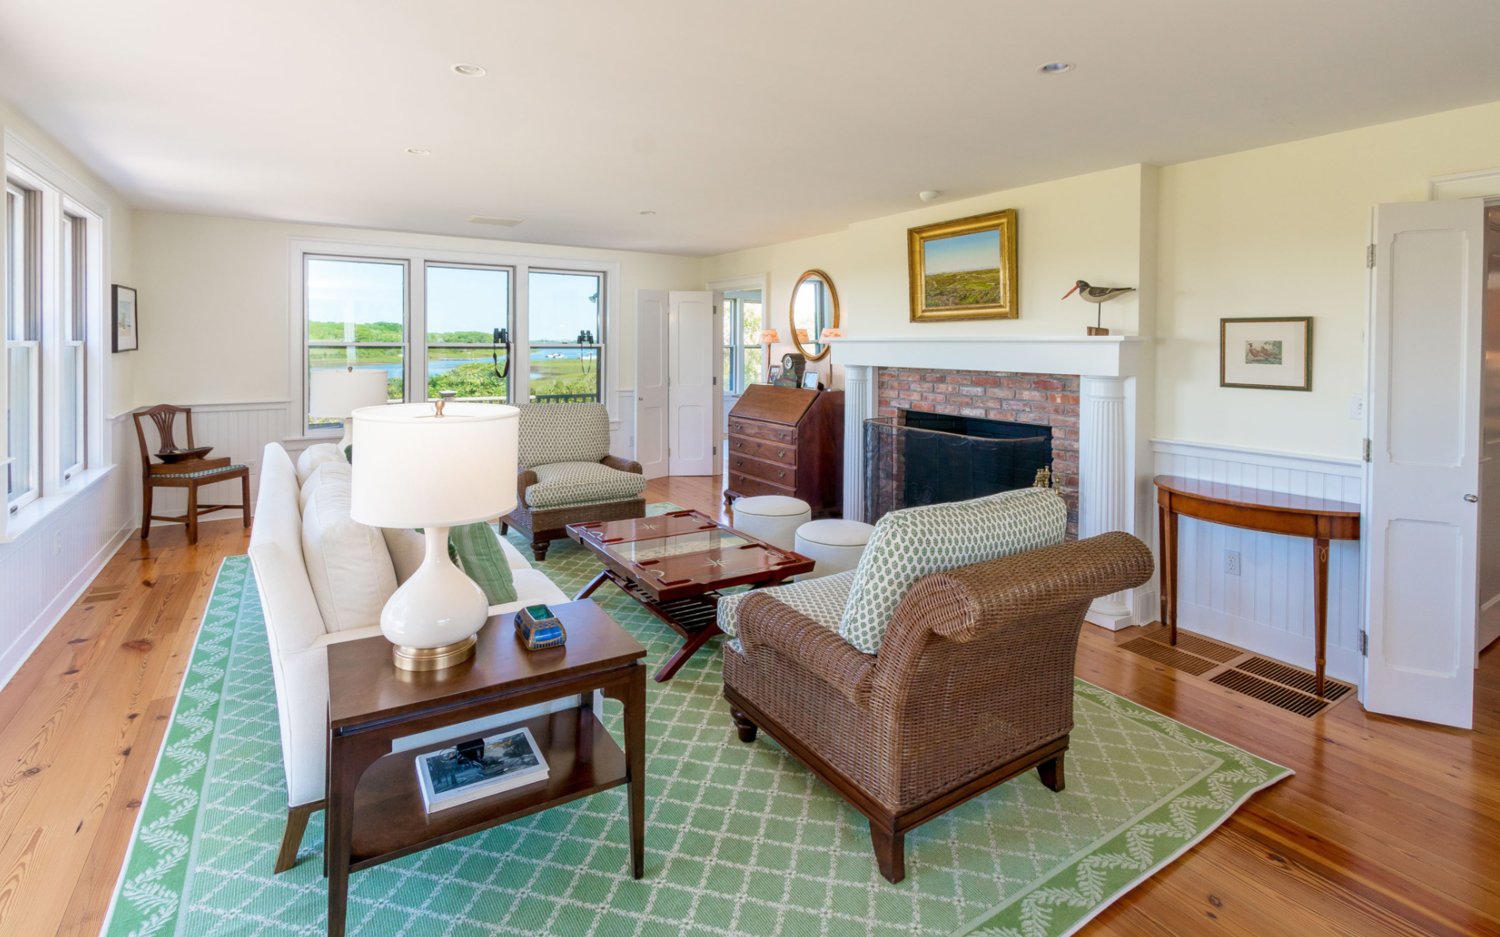 The family room has a brick fireplace and like much of the rest of the home, views of Polpis Harbor.